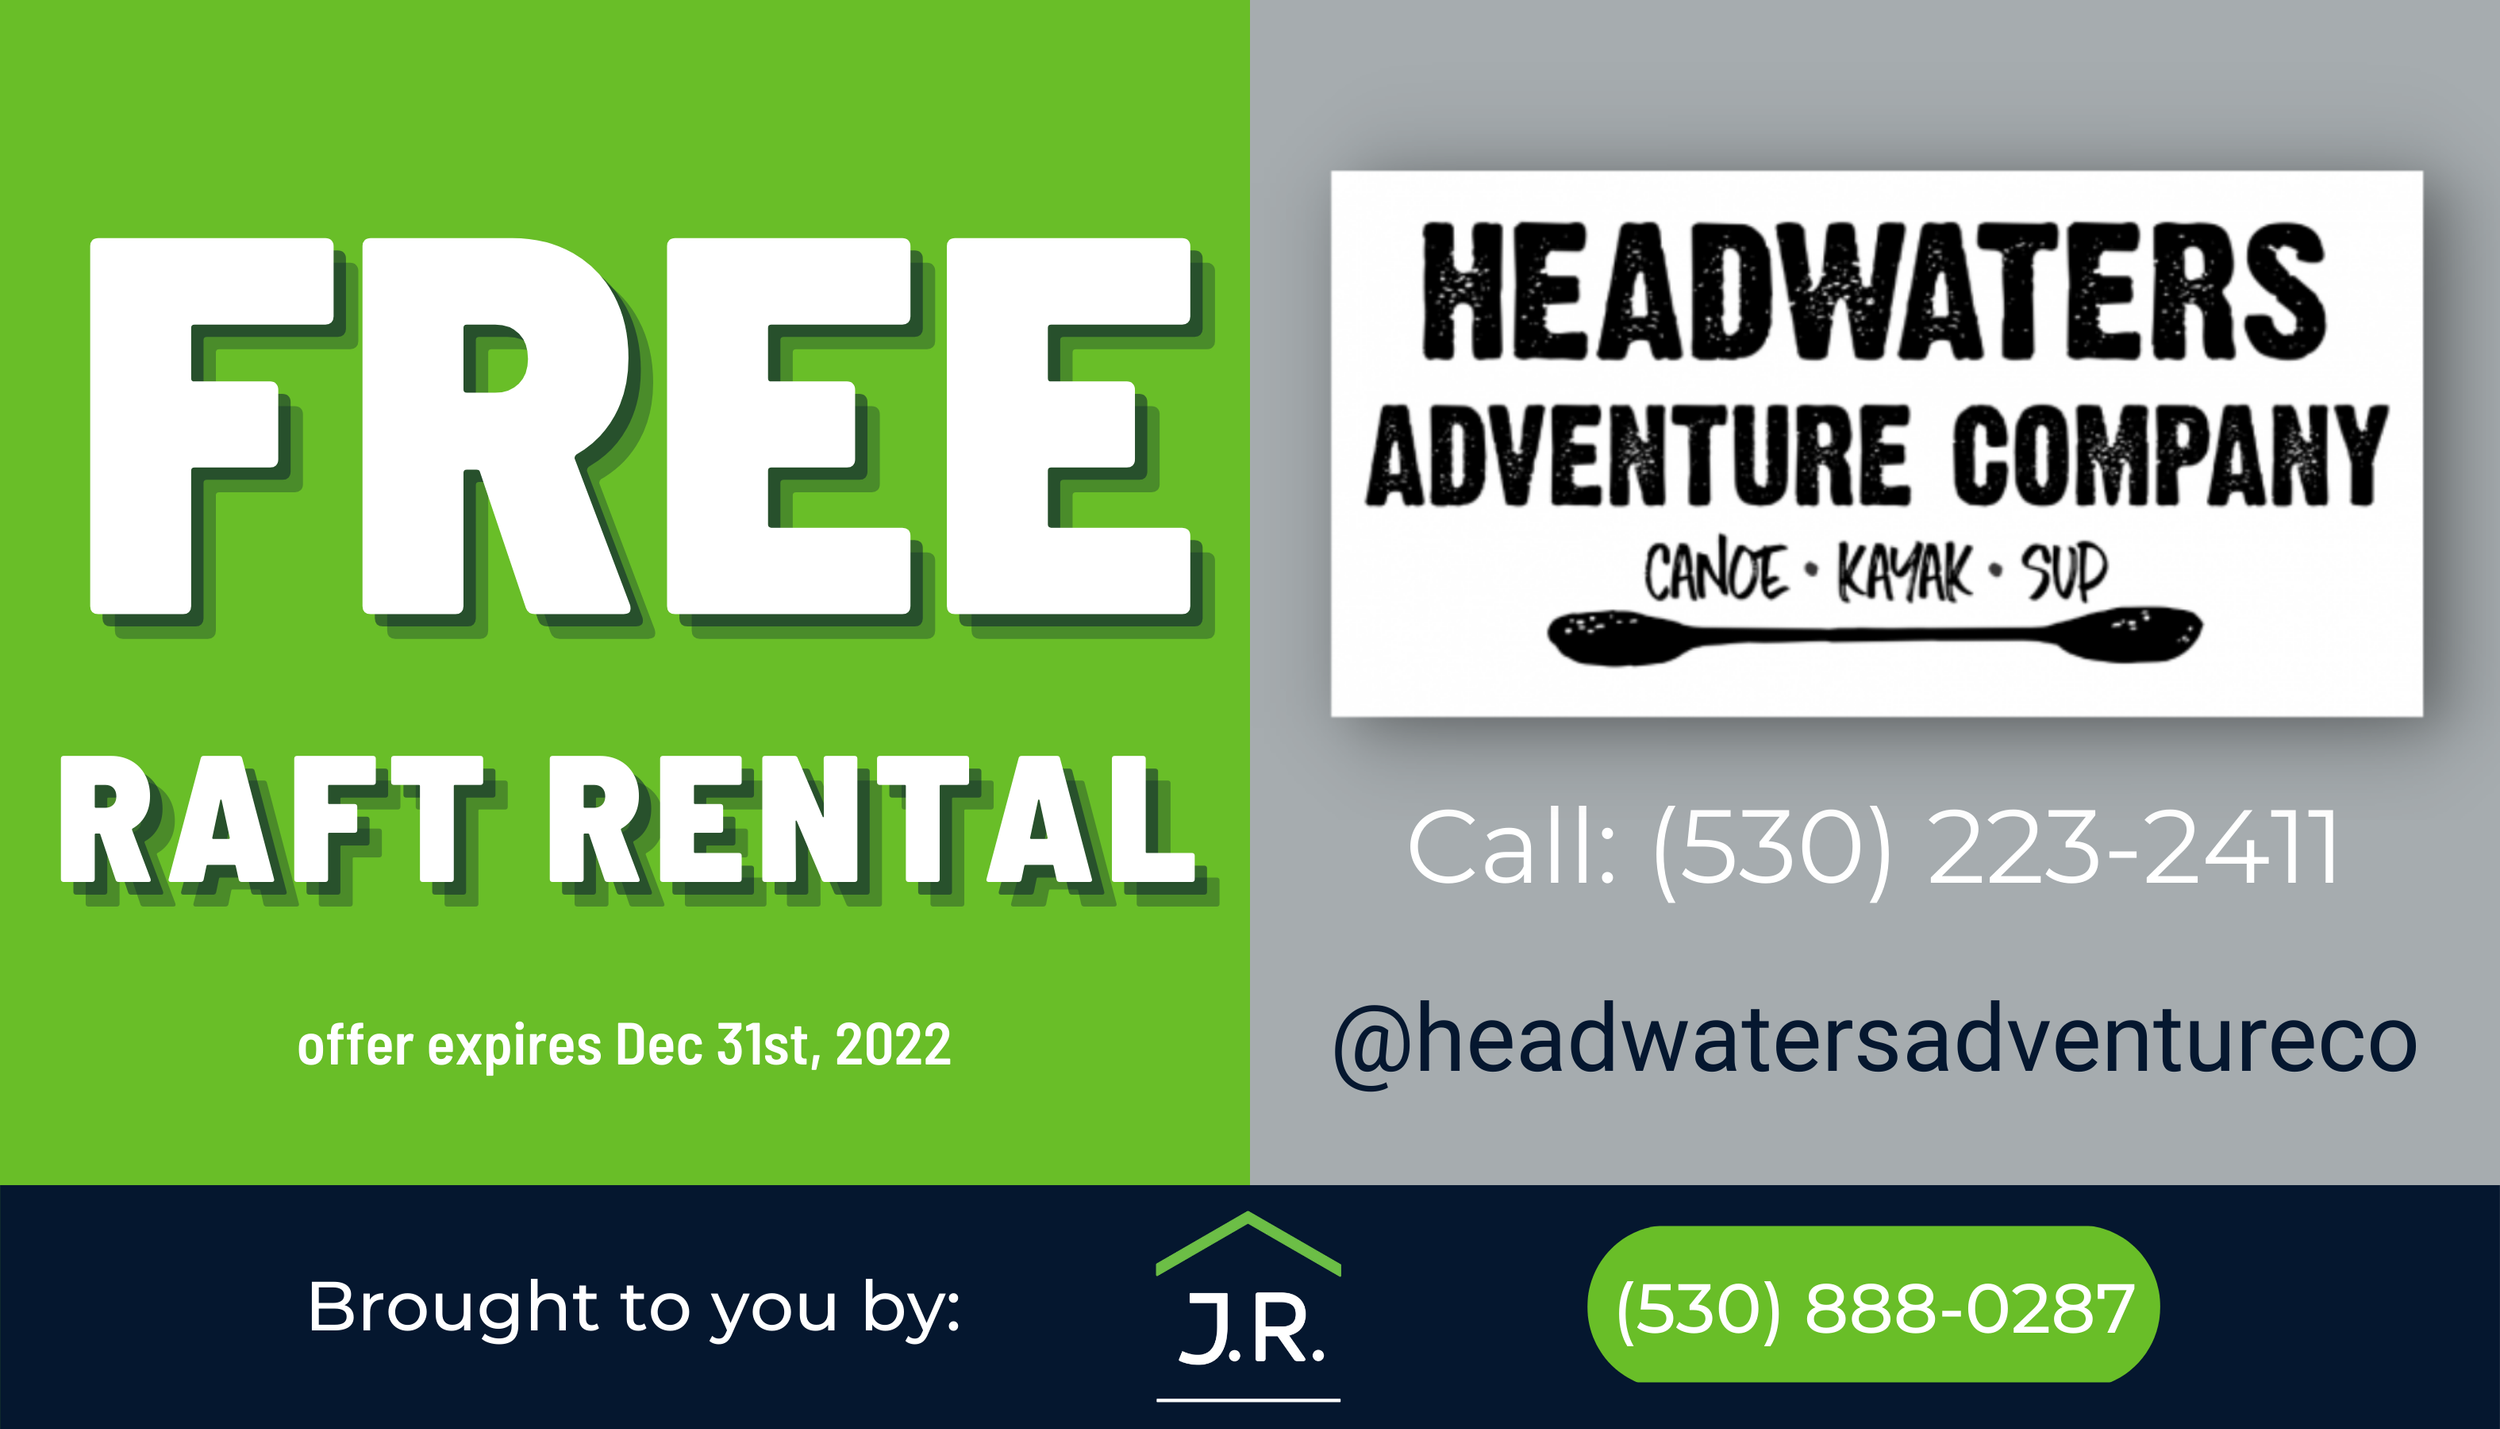 Headwaters promo 2.png